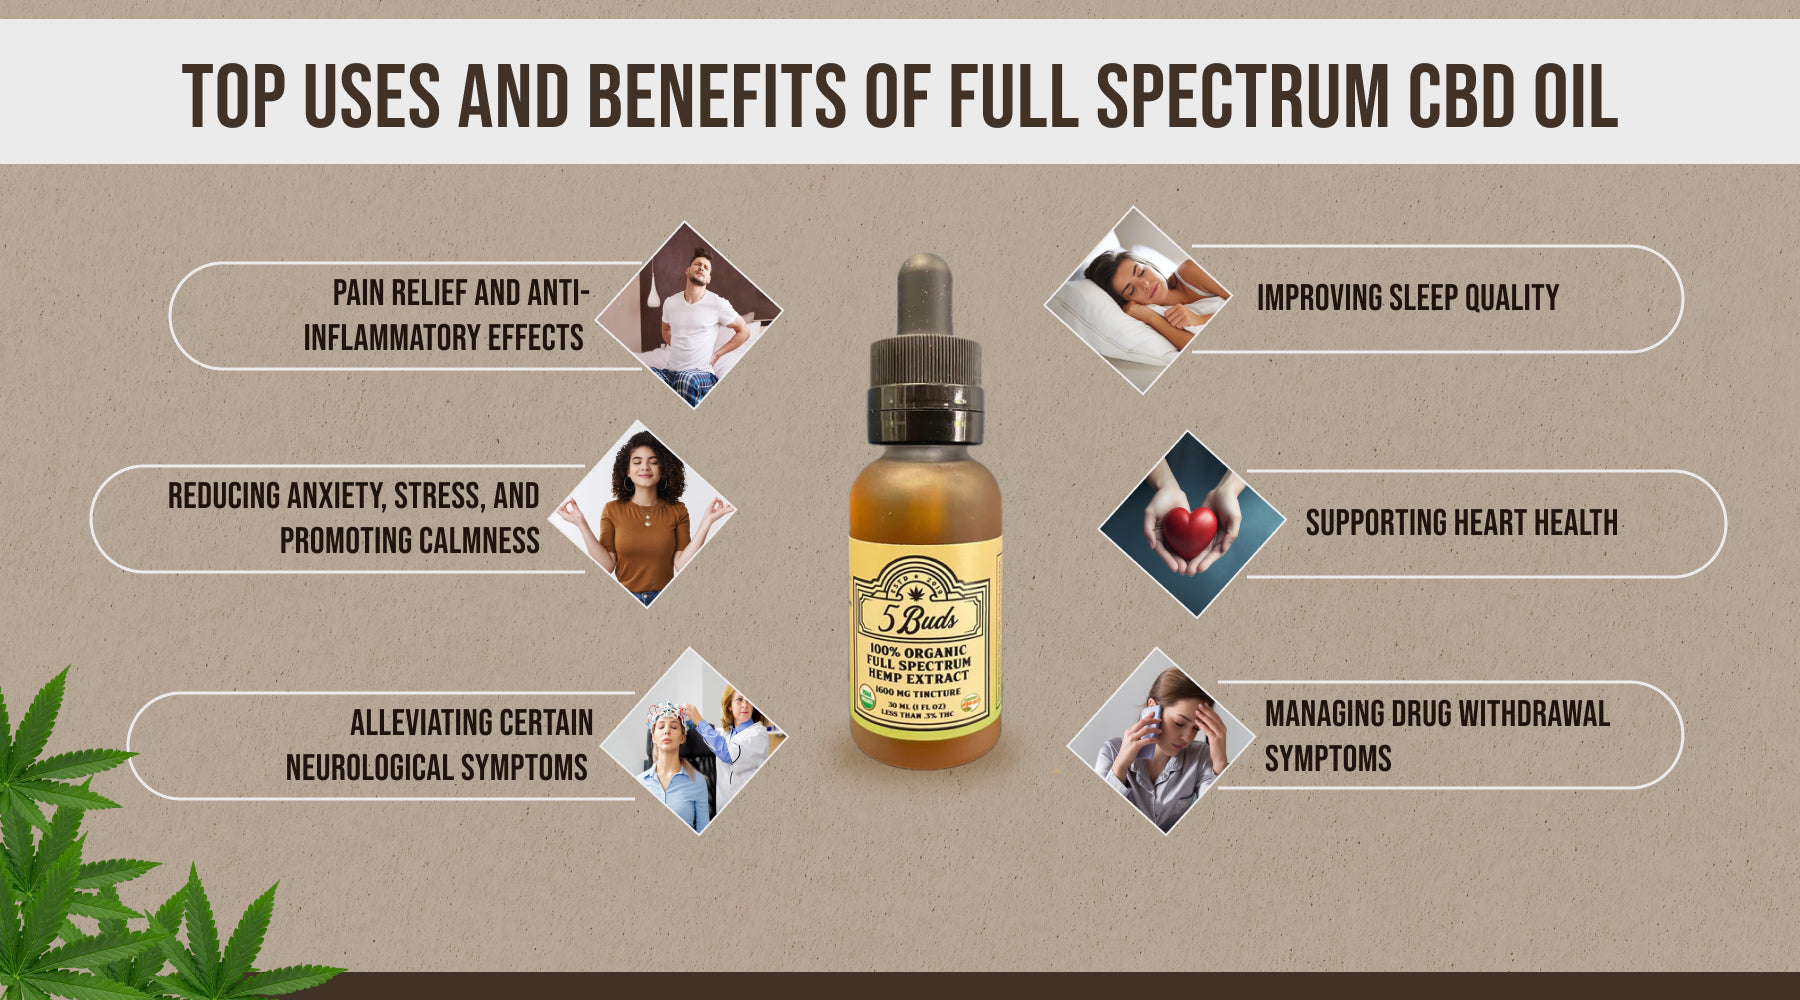 Top Uses and Benefits of Full Spectrum CBD Oil